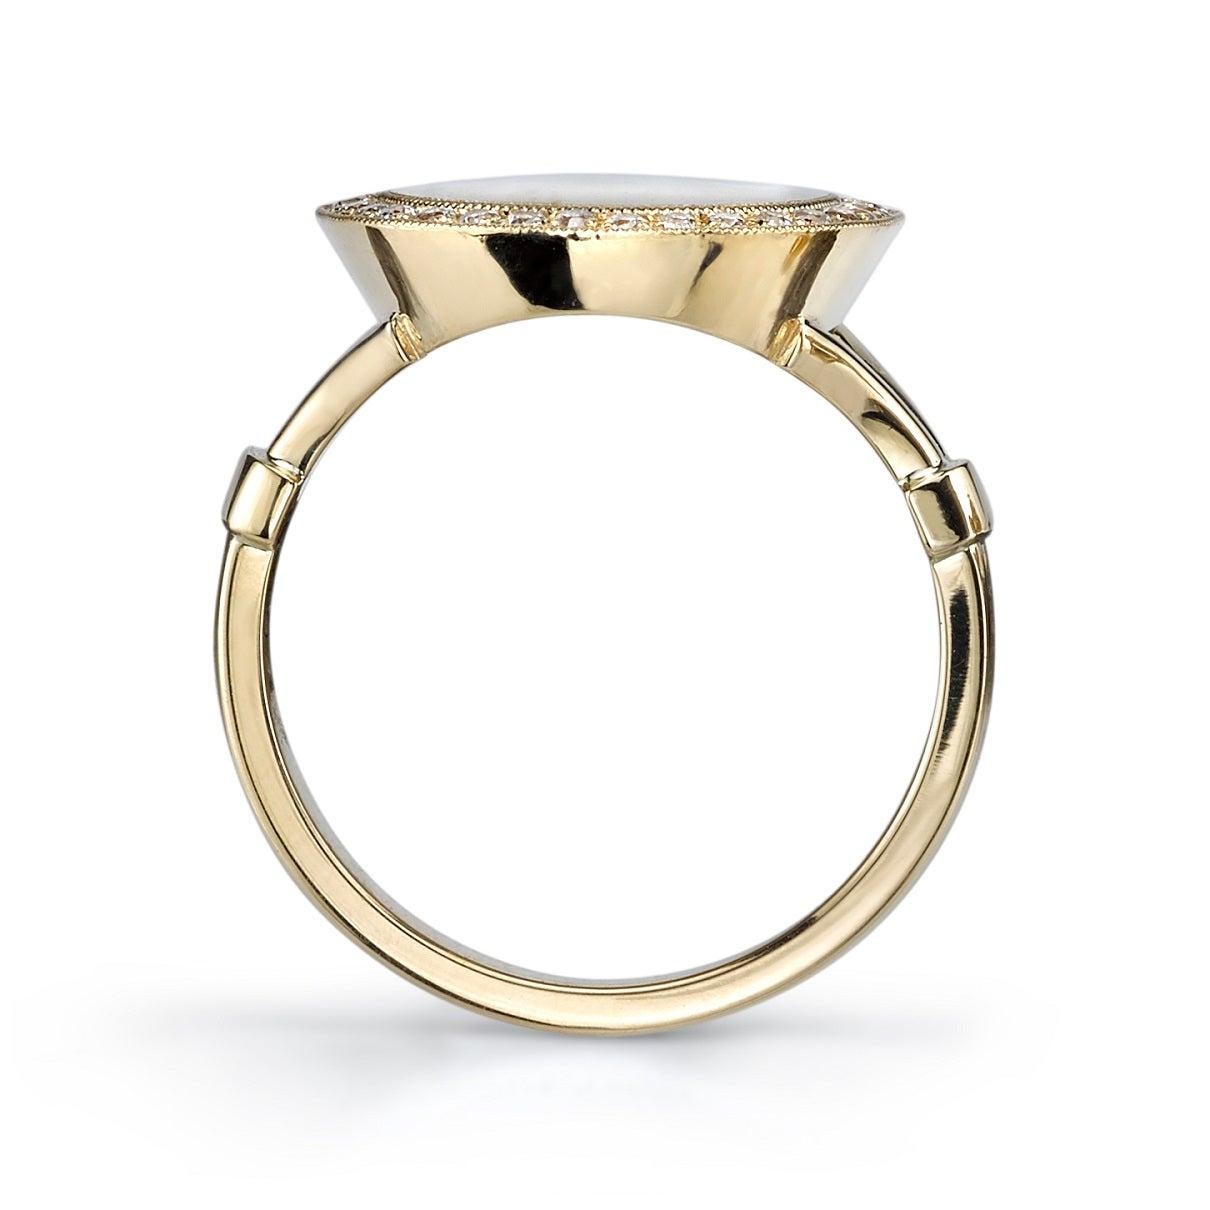 For Sale:  Handcrafted Paxton Diamond Frame Signet Ring in 18K Yellow Gold by Single Stone 3